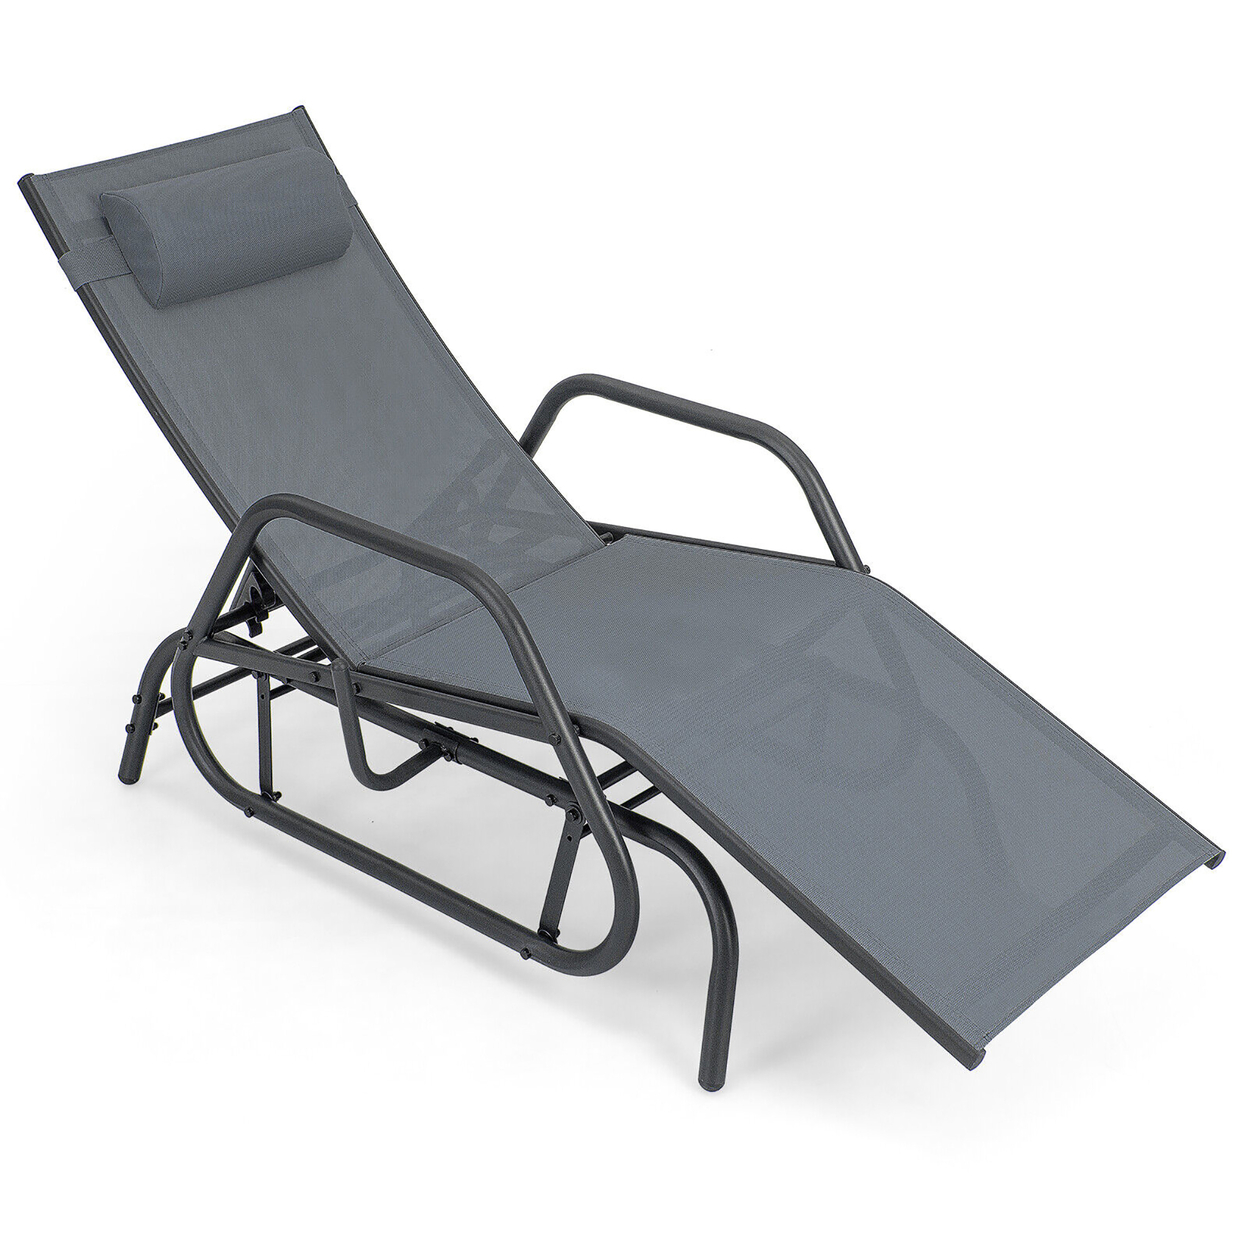 Patio Chaise Lounge Glider Recliner Chair Adjustable Sturdy Metal Frame Outdoor - Grey